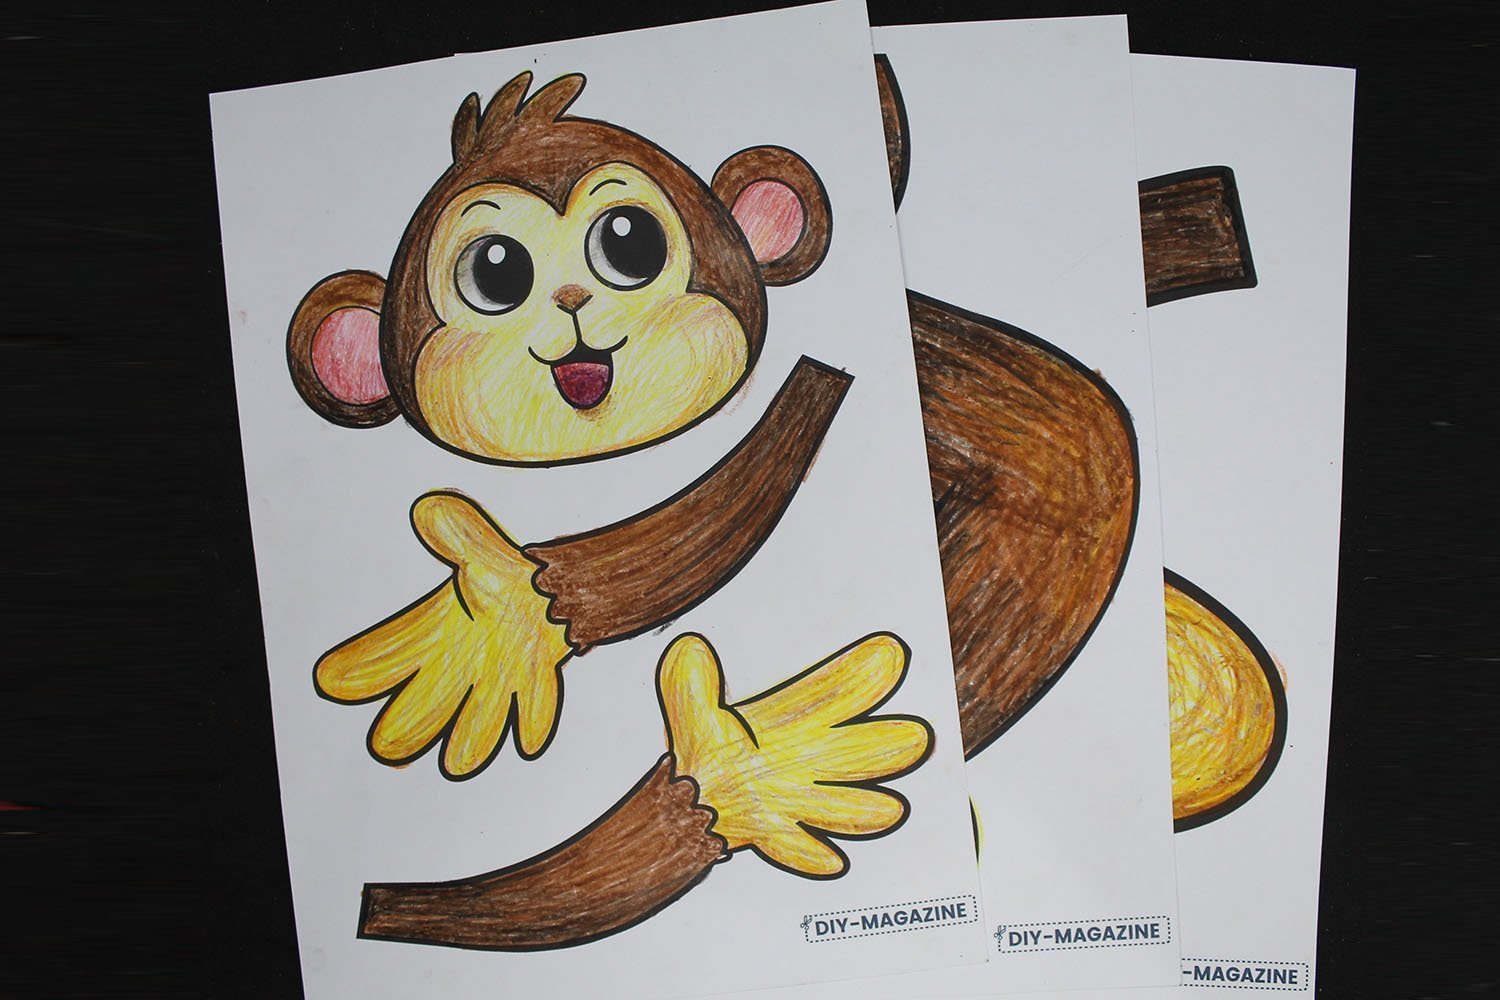 How to Make a Paper Plate Monkey - Step 10